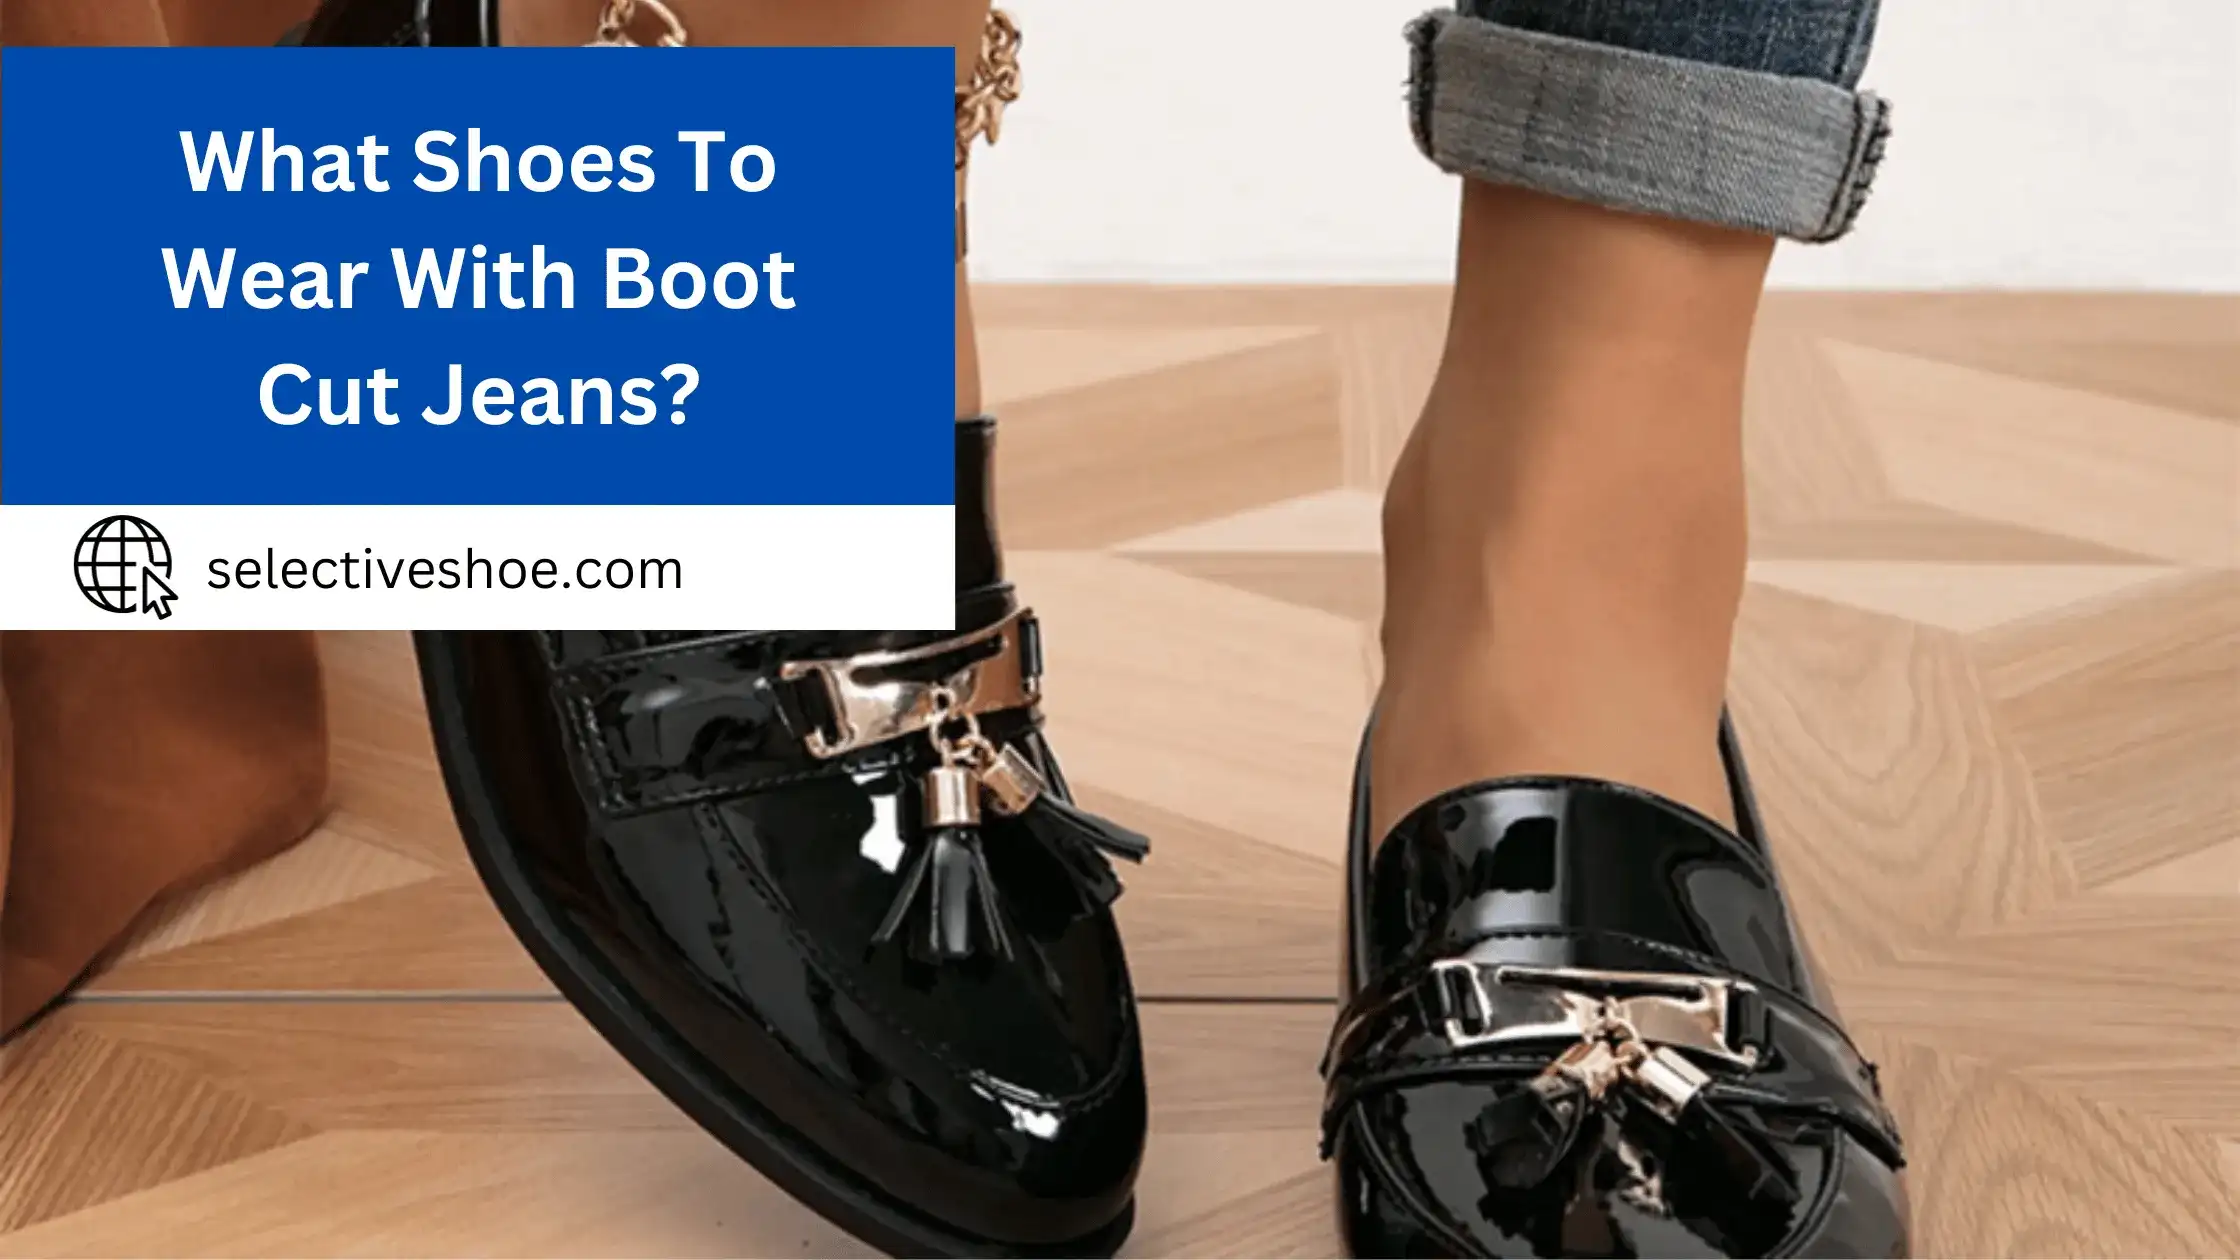 What Shoes To Wear With Boot Cut Jeans? Easy Guide